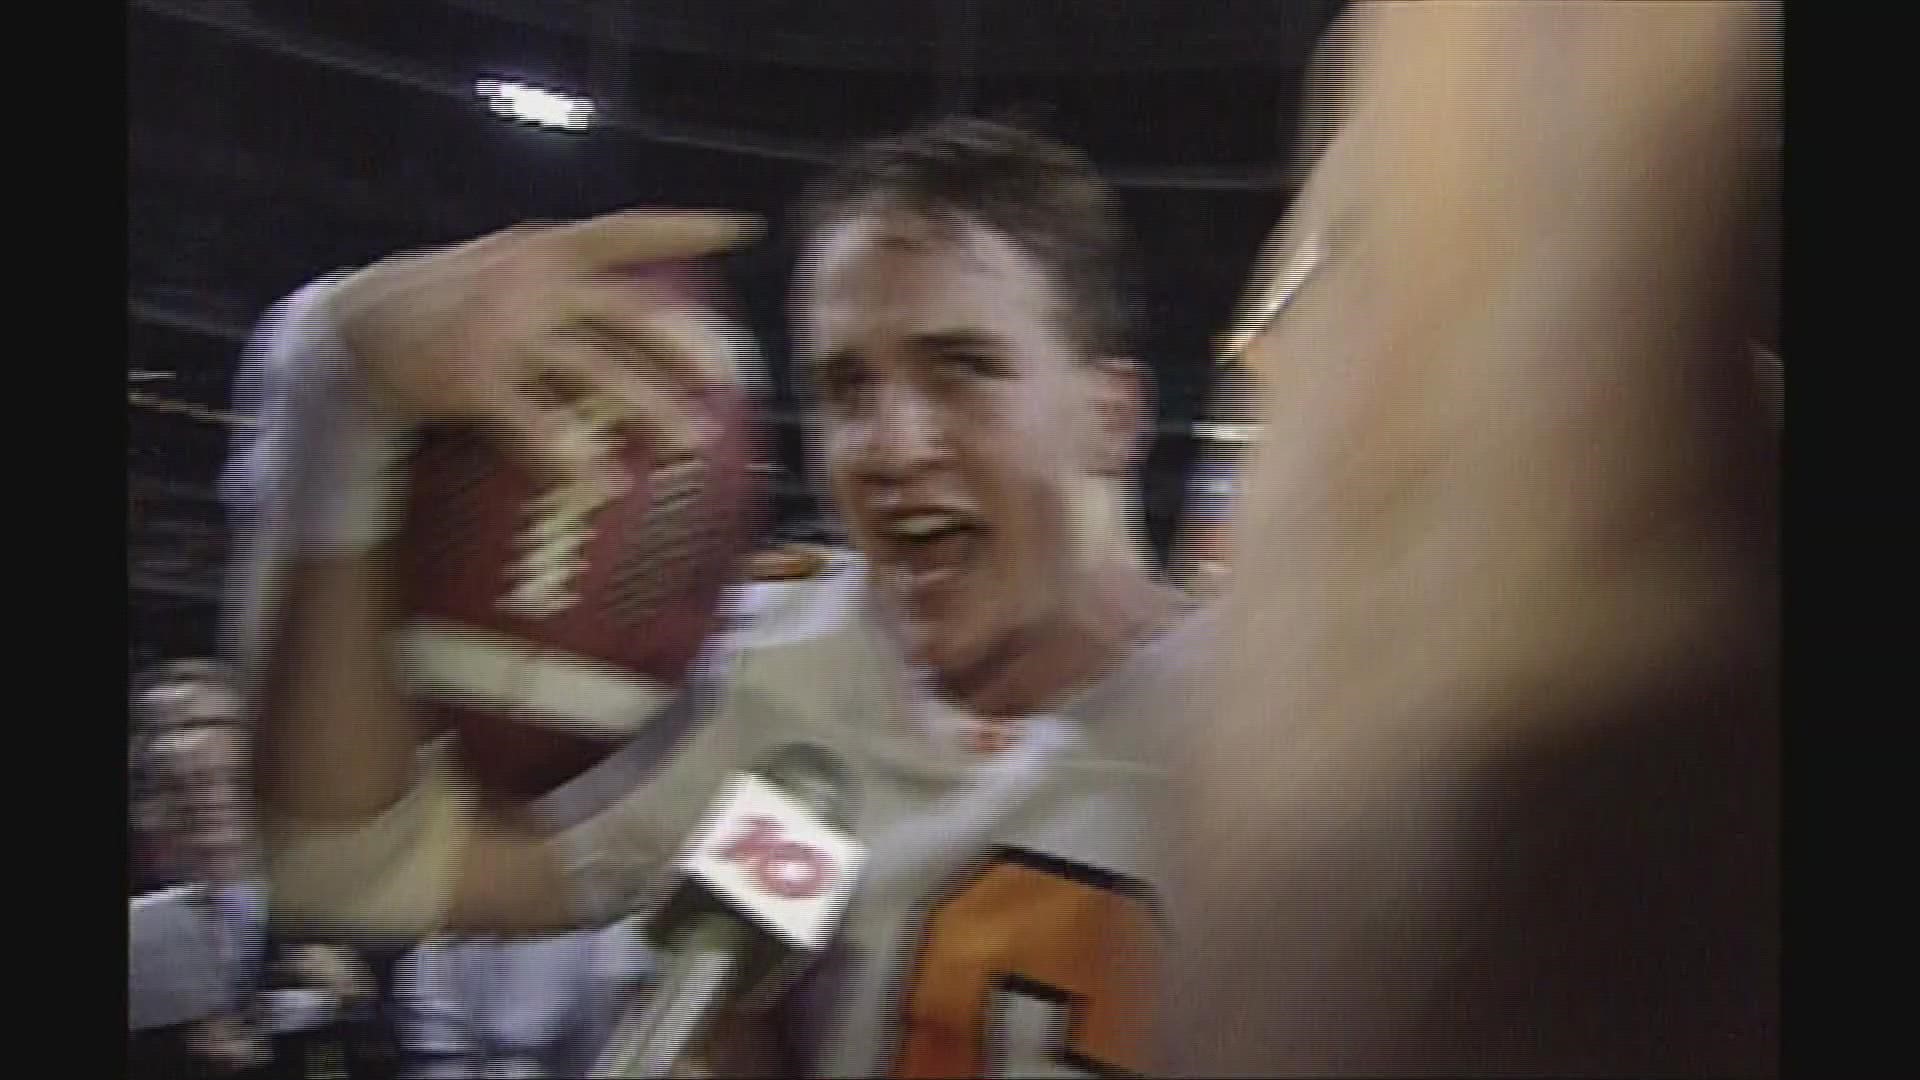 January 2, 1998 marked Peyton Manning's final game in a Tennessee Volunteers uniform. This is the story behind his final snaps as a Vol.